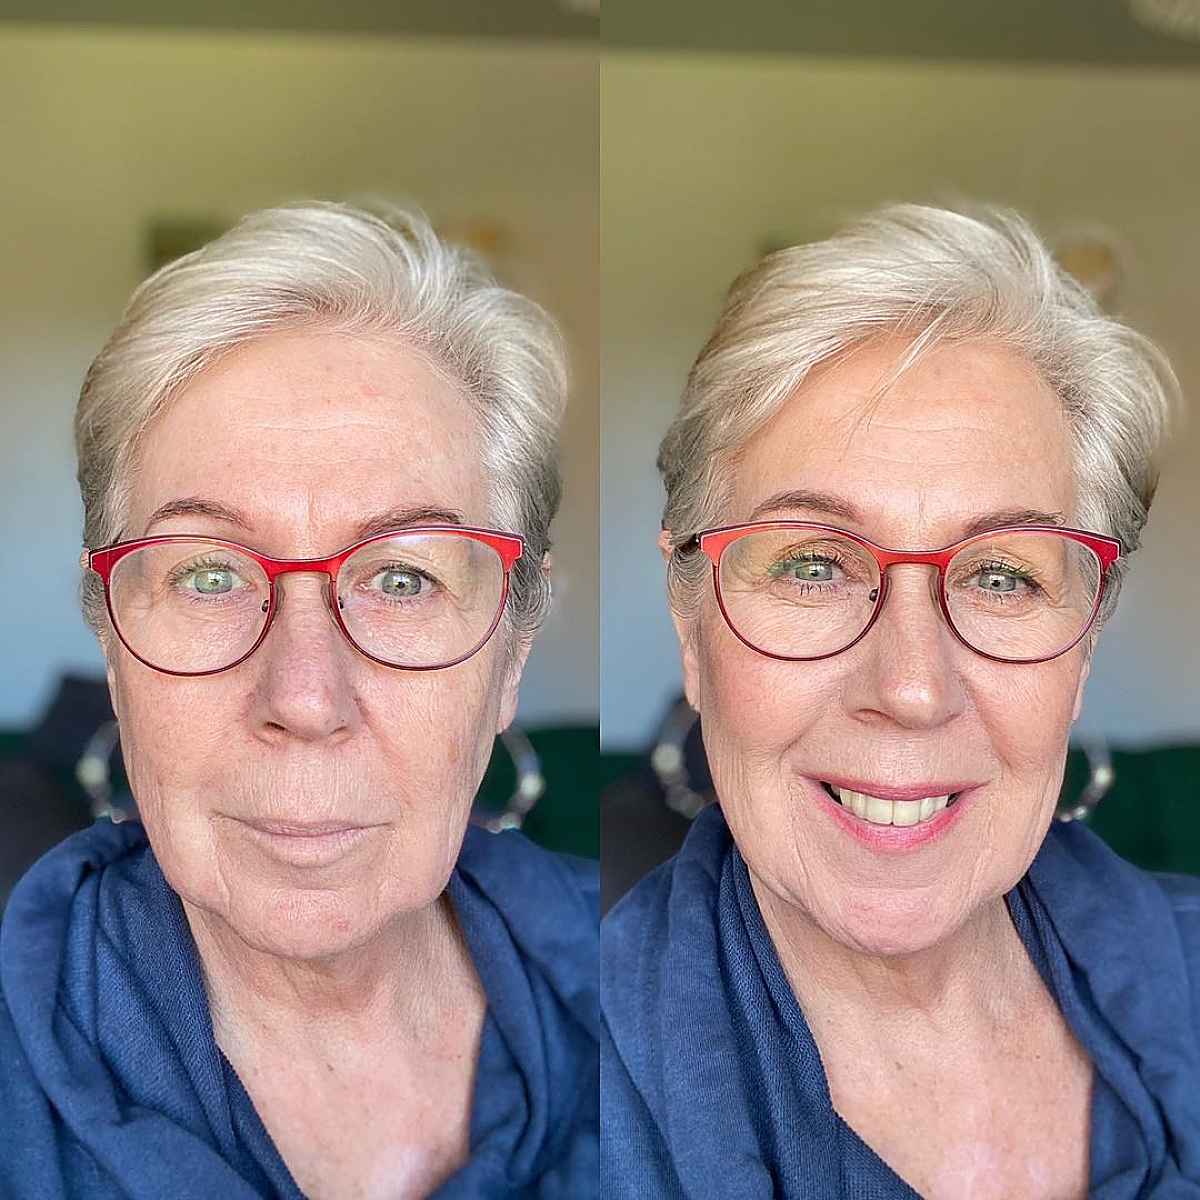 26 Flattering Hairstyles for Women Over 60 with Glasses